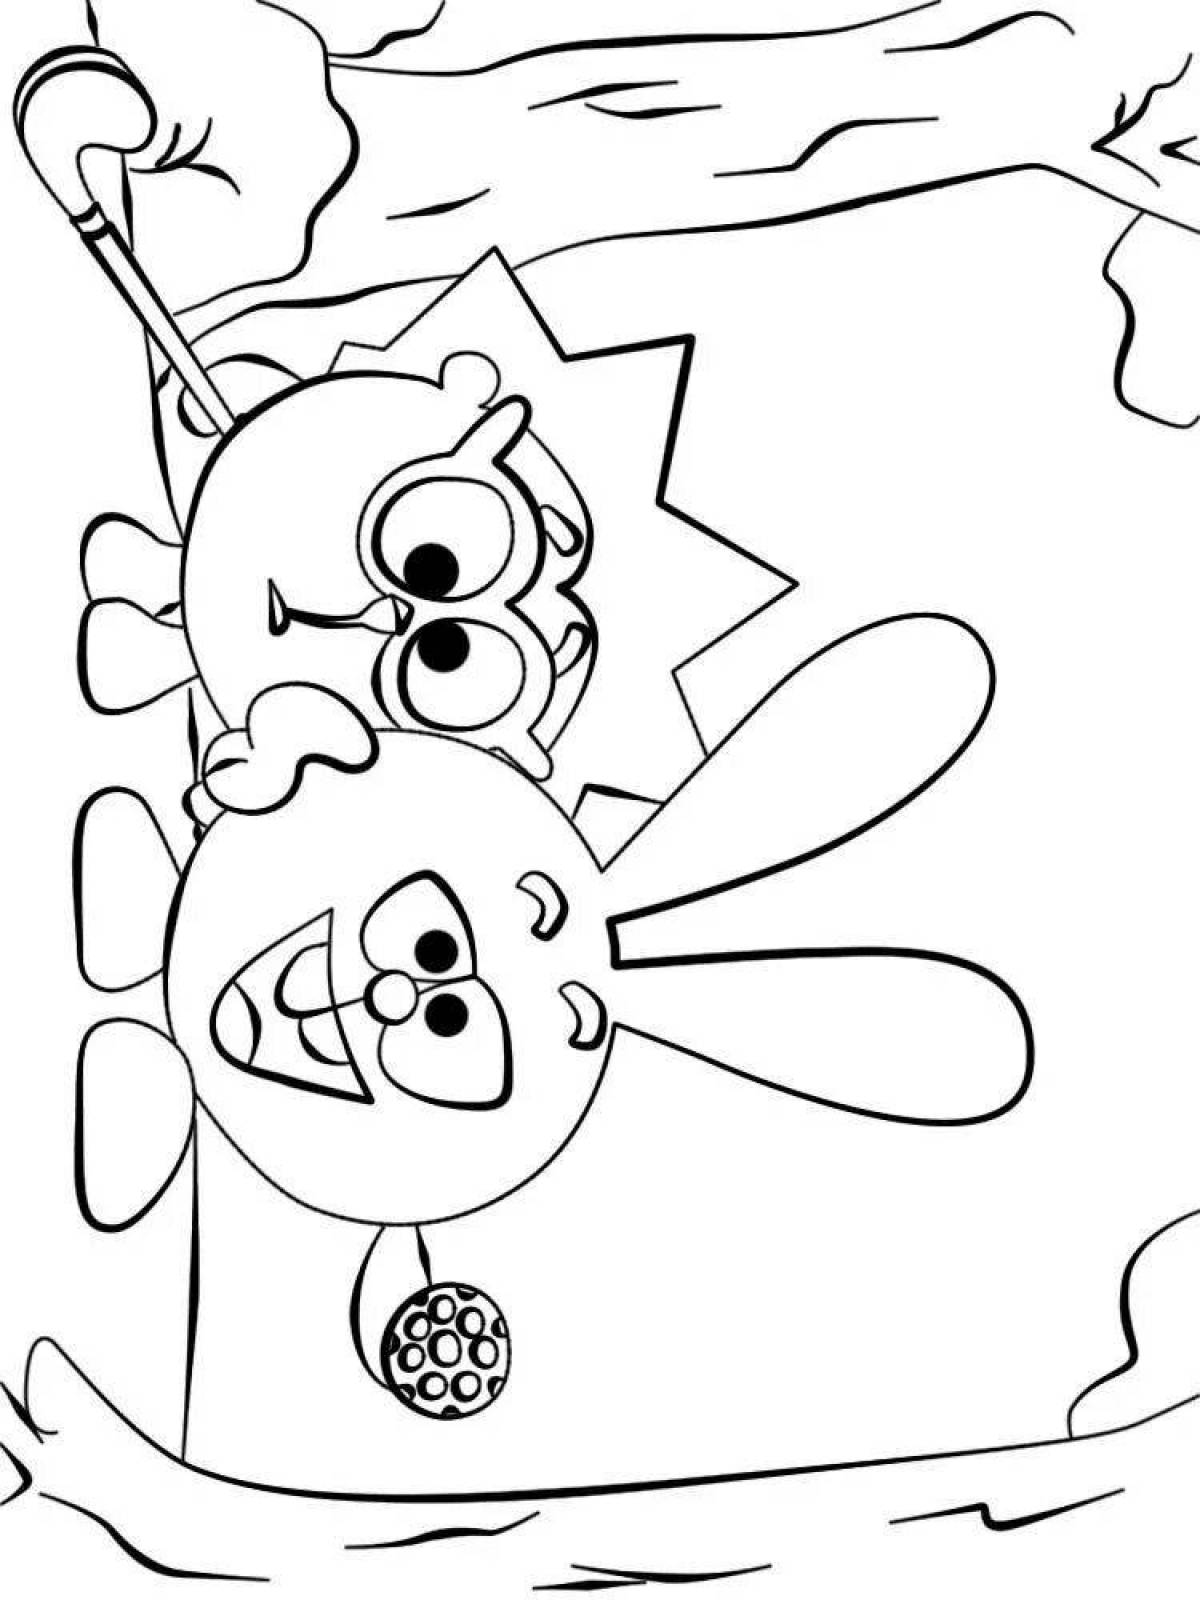 Coloring page baby and hedgehog